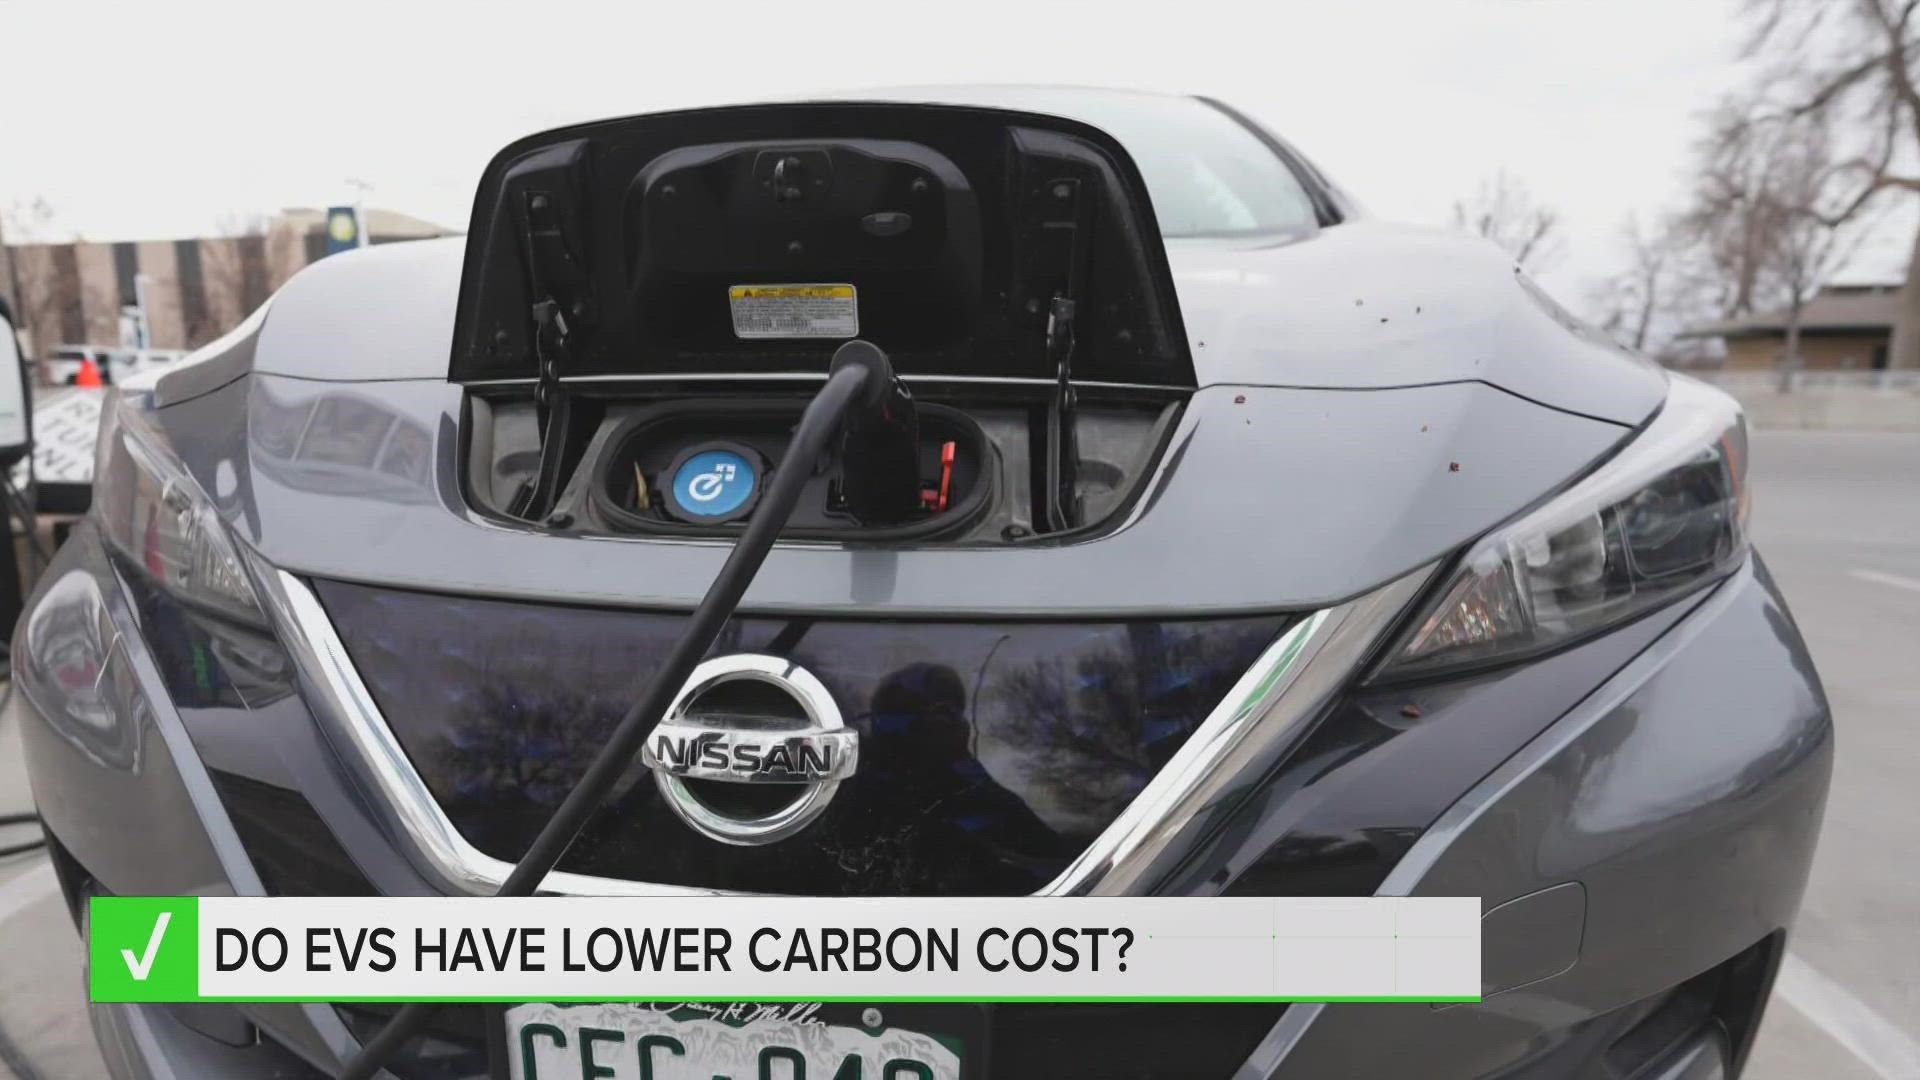 Just how clean are electric vehicles? And what about unexpected costs? Let's verify.